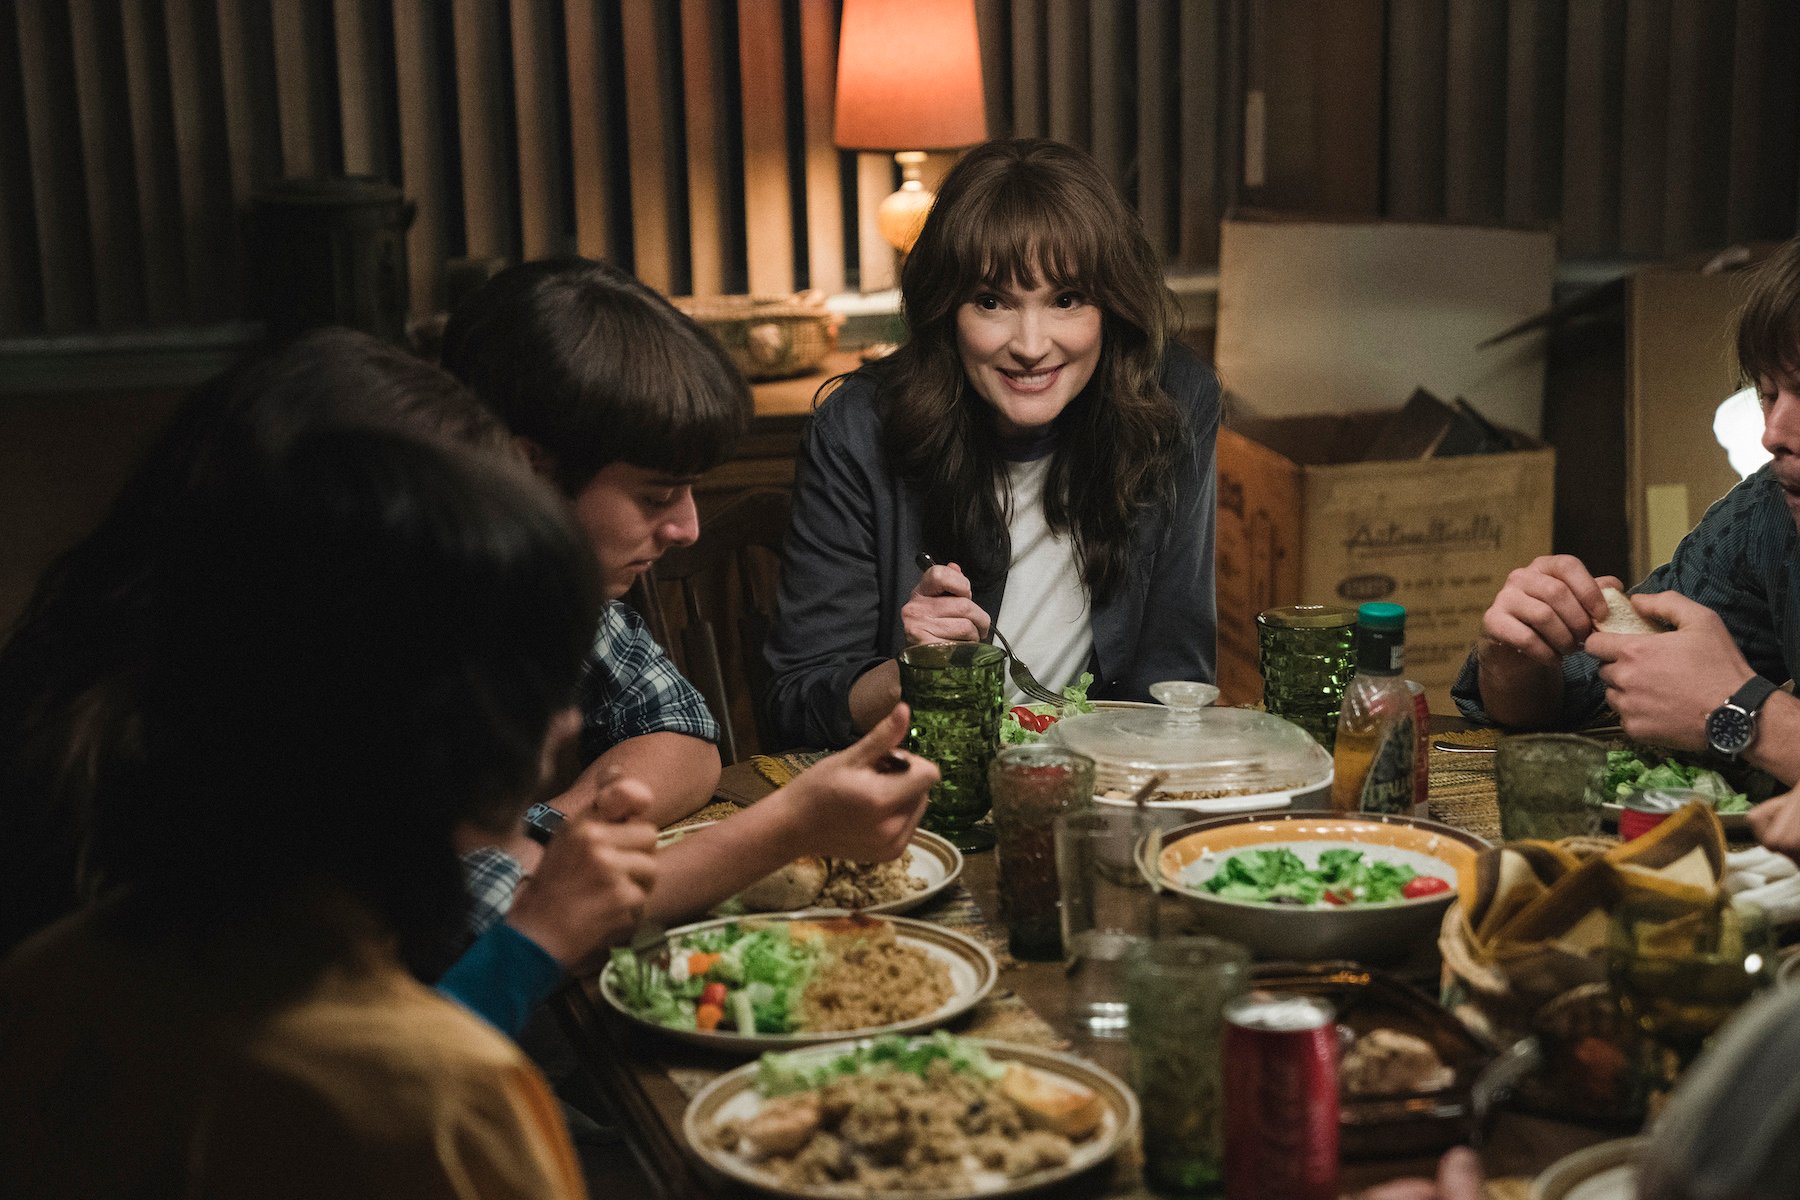 Noah Schanpp as Will Byers and Winona Ryder as Joyce Byers eating dinner together in 'Stranger Things' Season 4